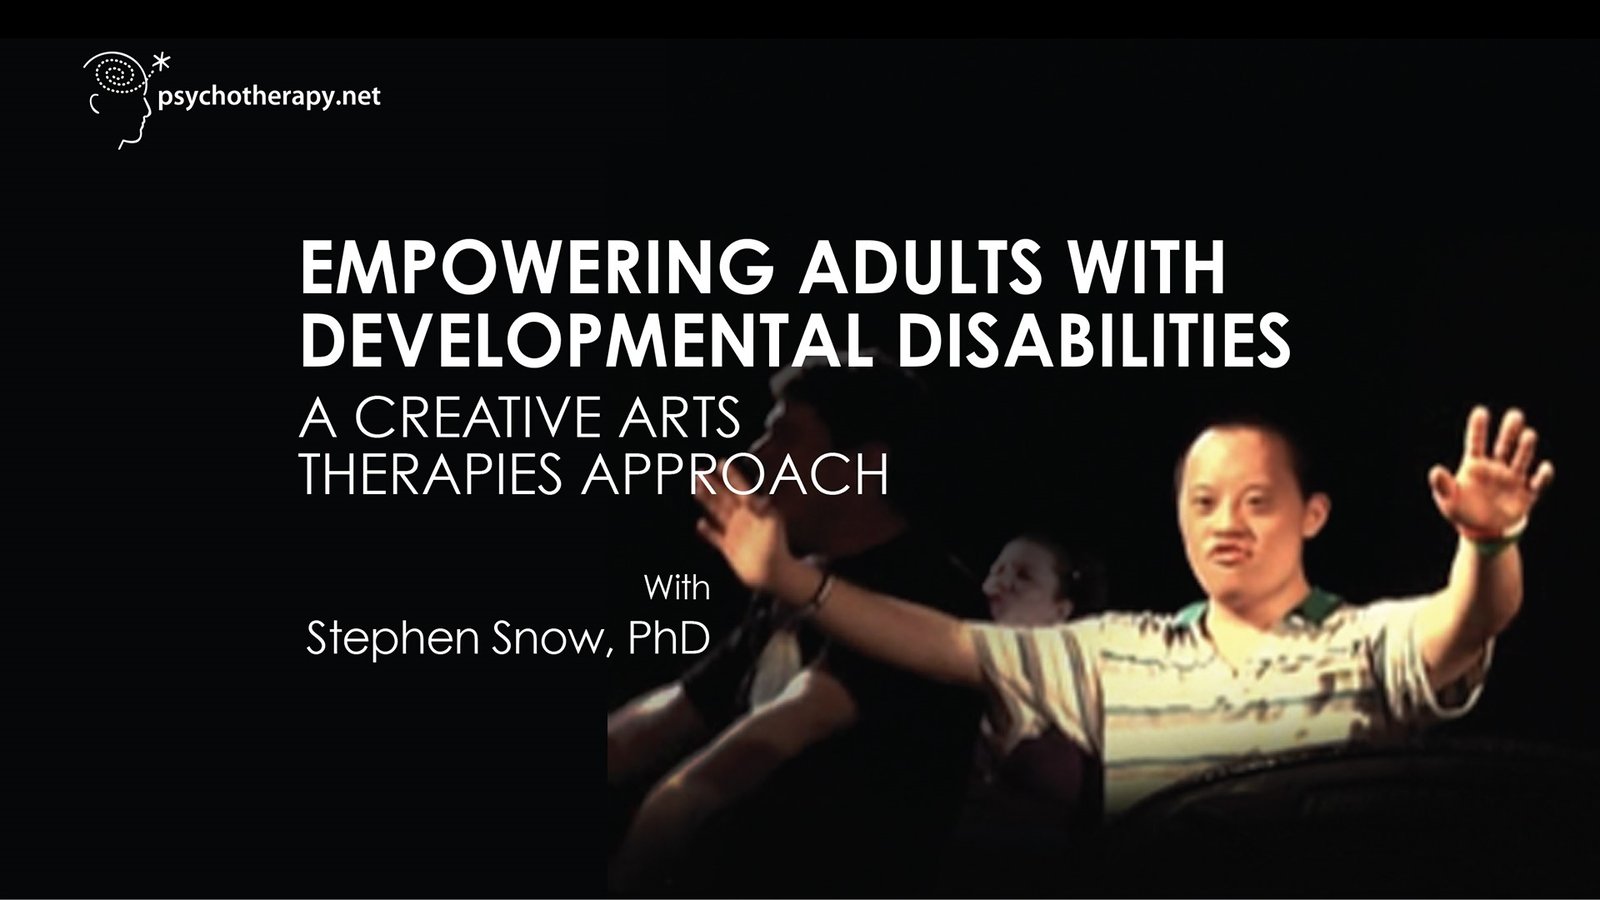 Empowering Adults with Developmental Disabilities - A Creative Arts Therapies Approach